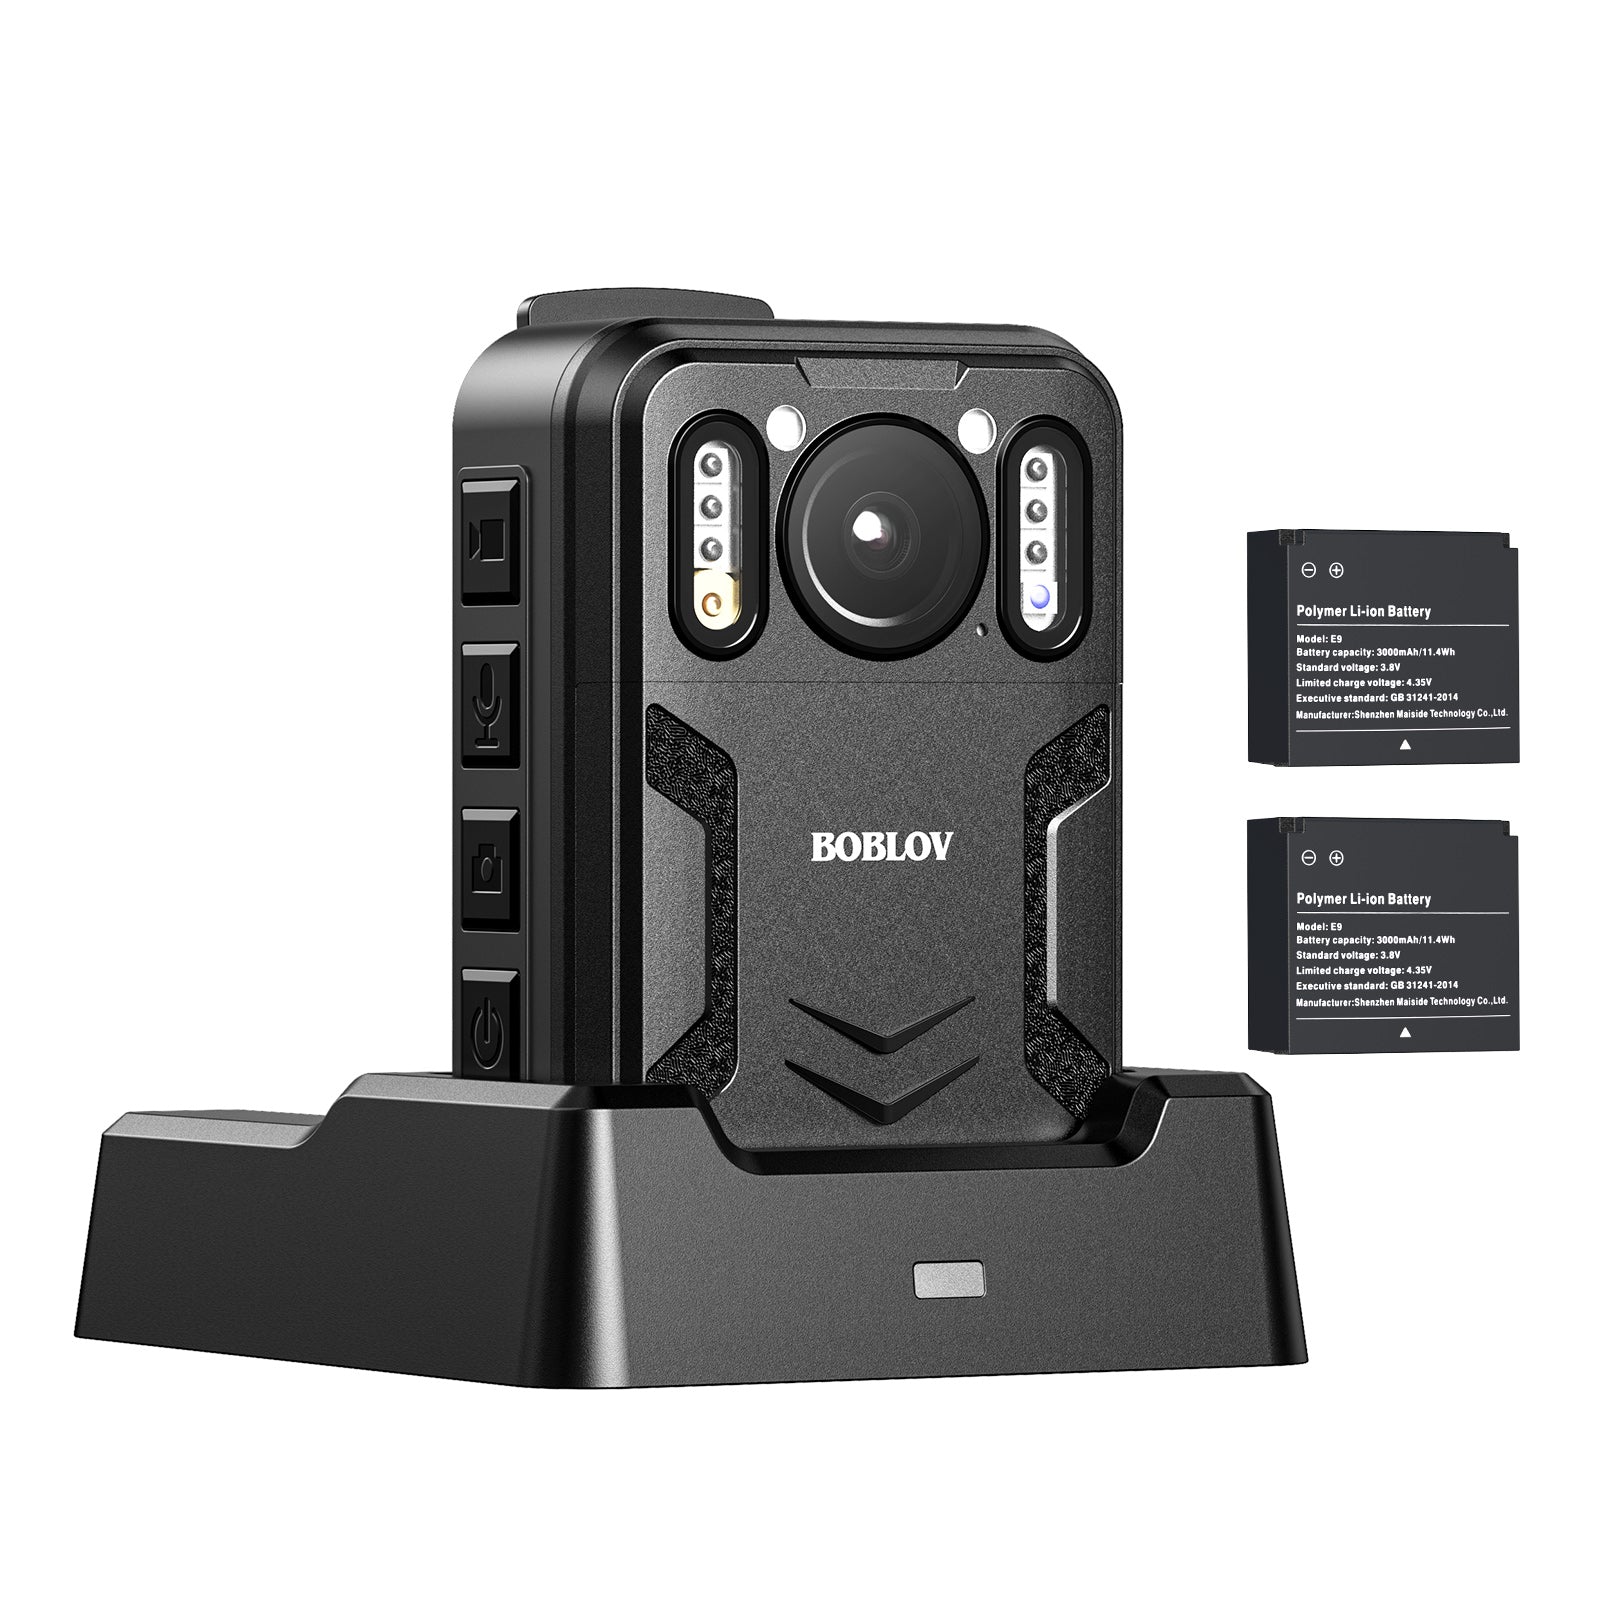 BOBLOV B4K2 4K body camera with GPS and two 3000mAh batteries for extended 14-16 hours recording, including charging dock6